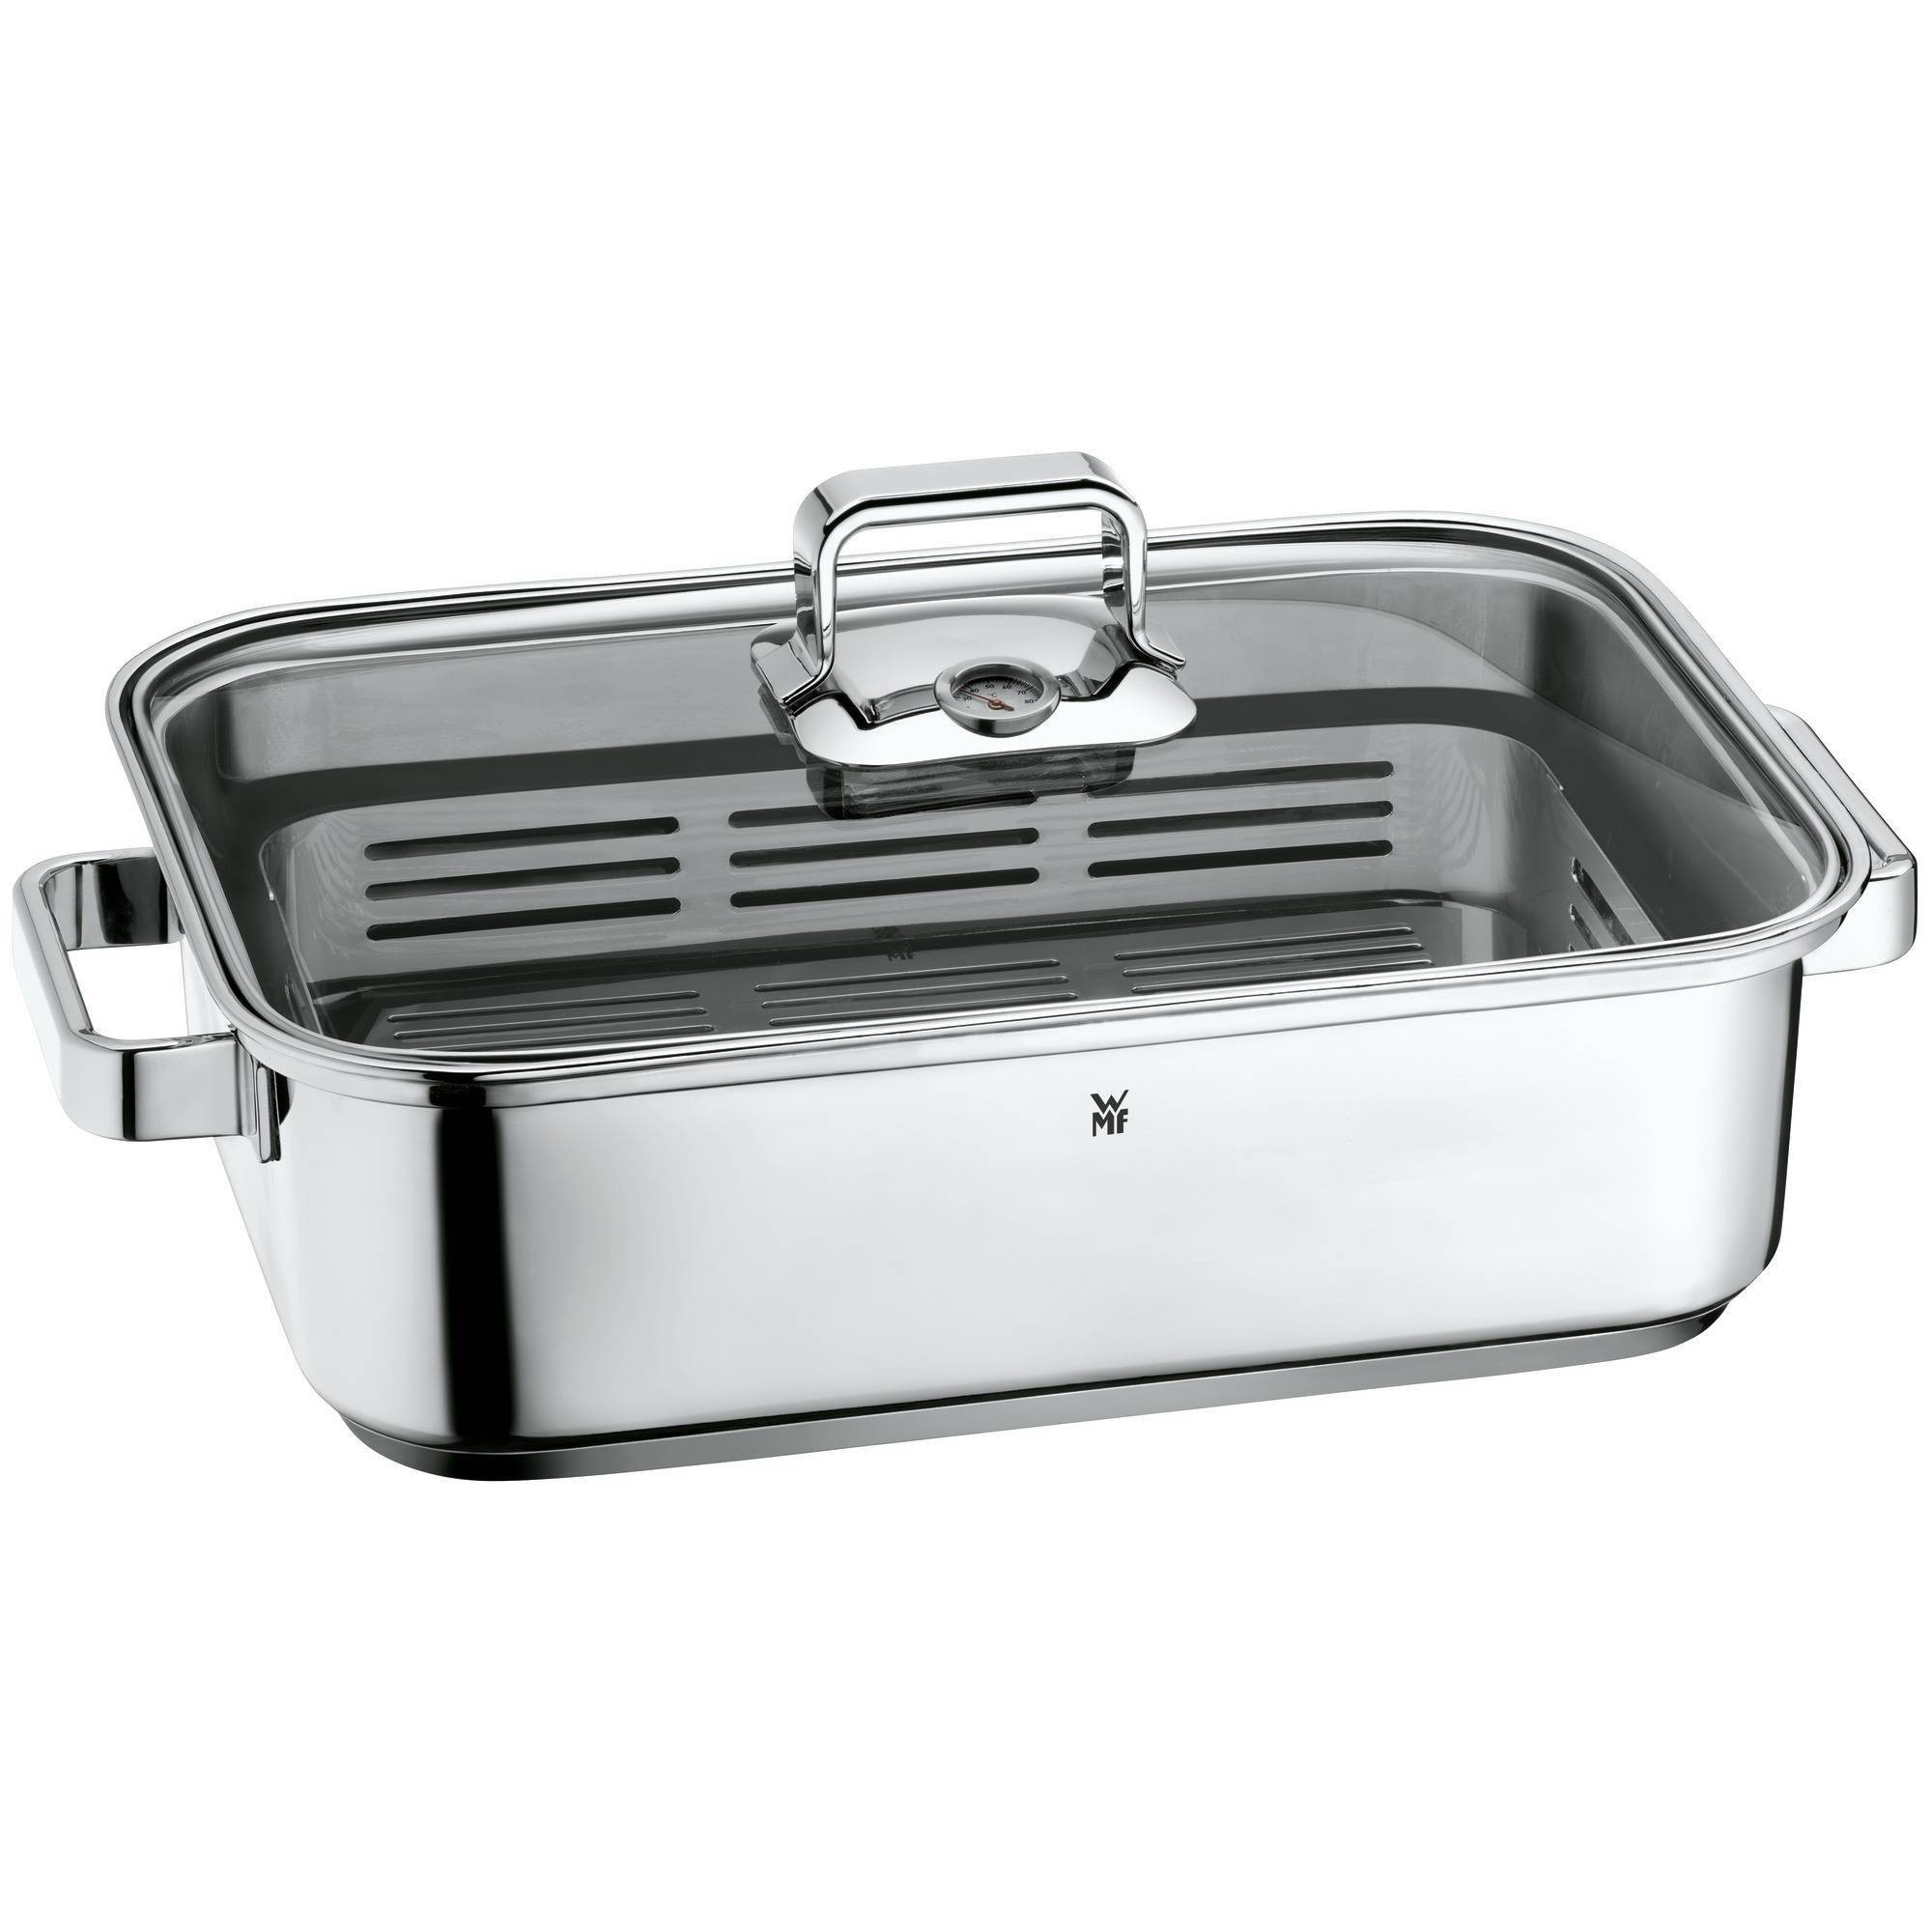 Silver Size S Dishwasher-Safe Relaxdays Stainless Steel Roasting Pan Oven Dish 